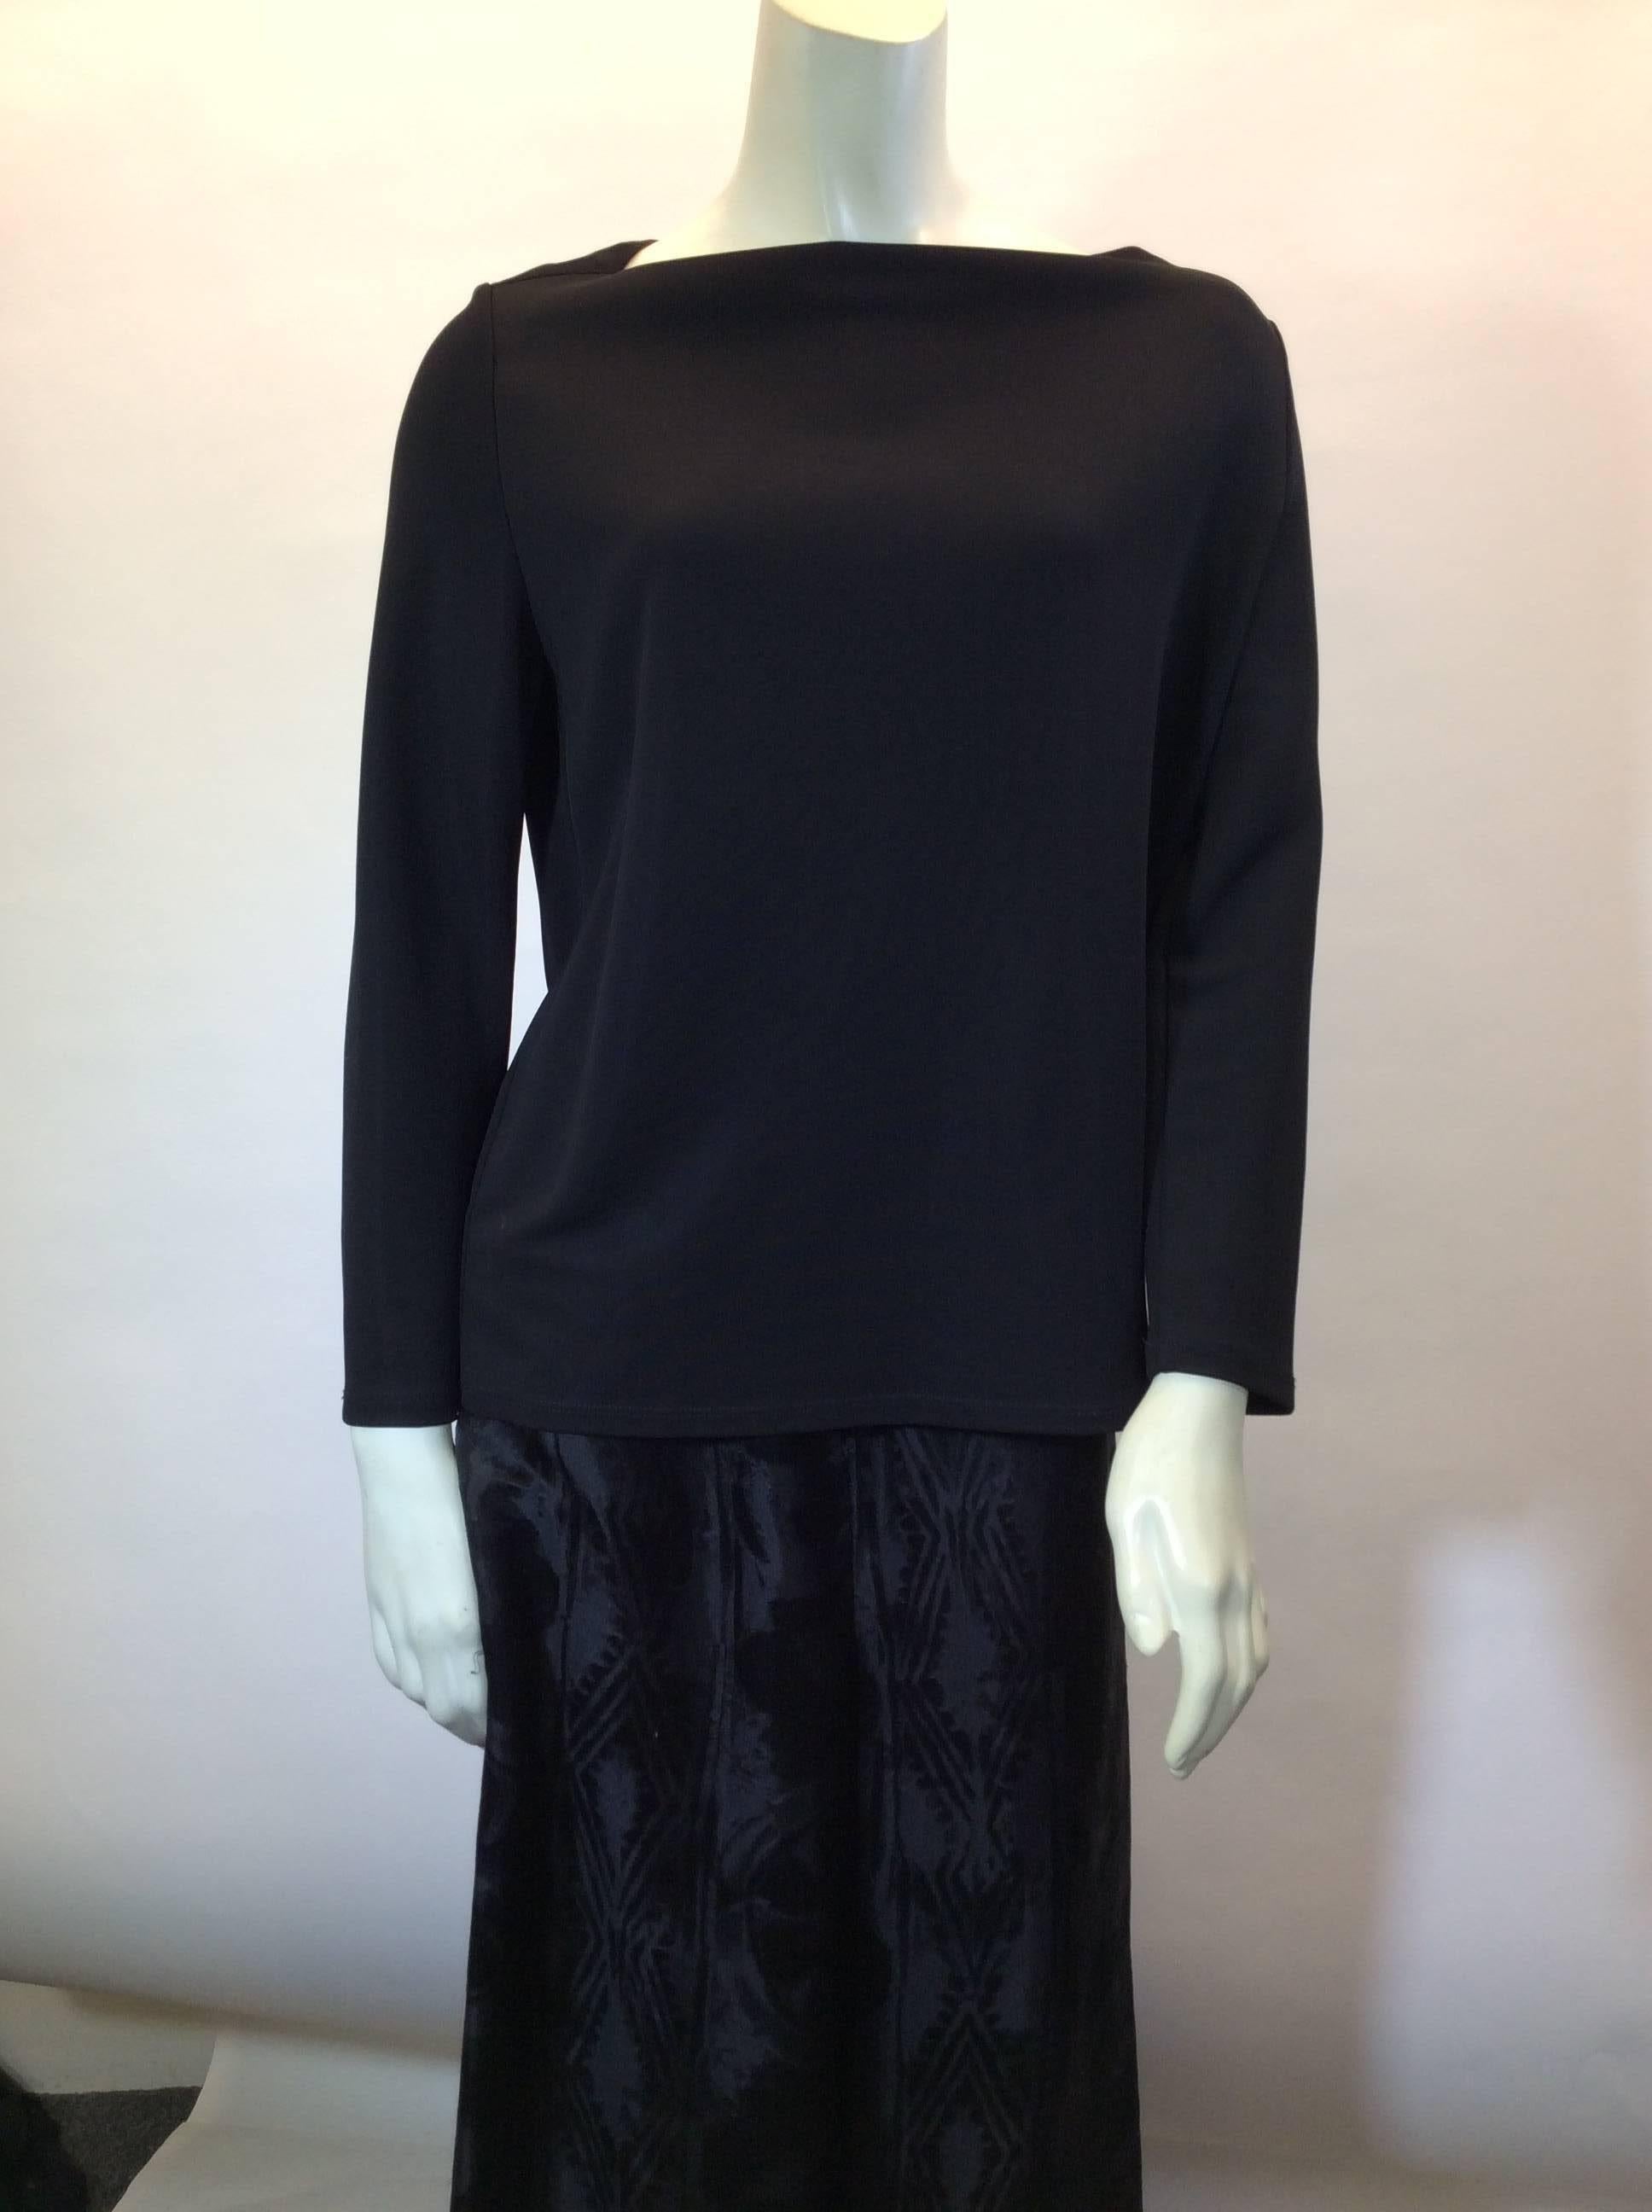 The Row Pant Set
Top is Viscose, Pants are Silk and Viscose
Size Medium
Long sleeve top and wide leg cropped pant